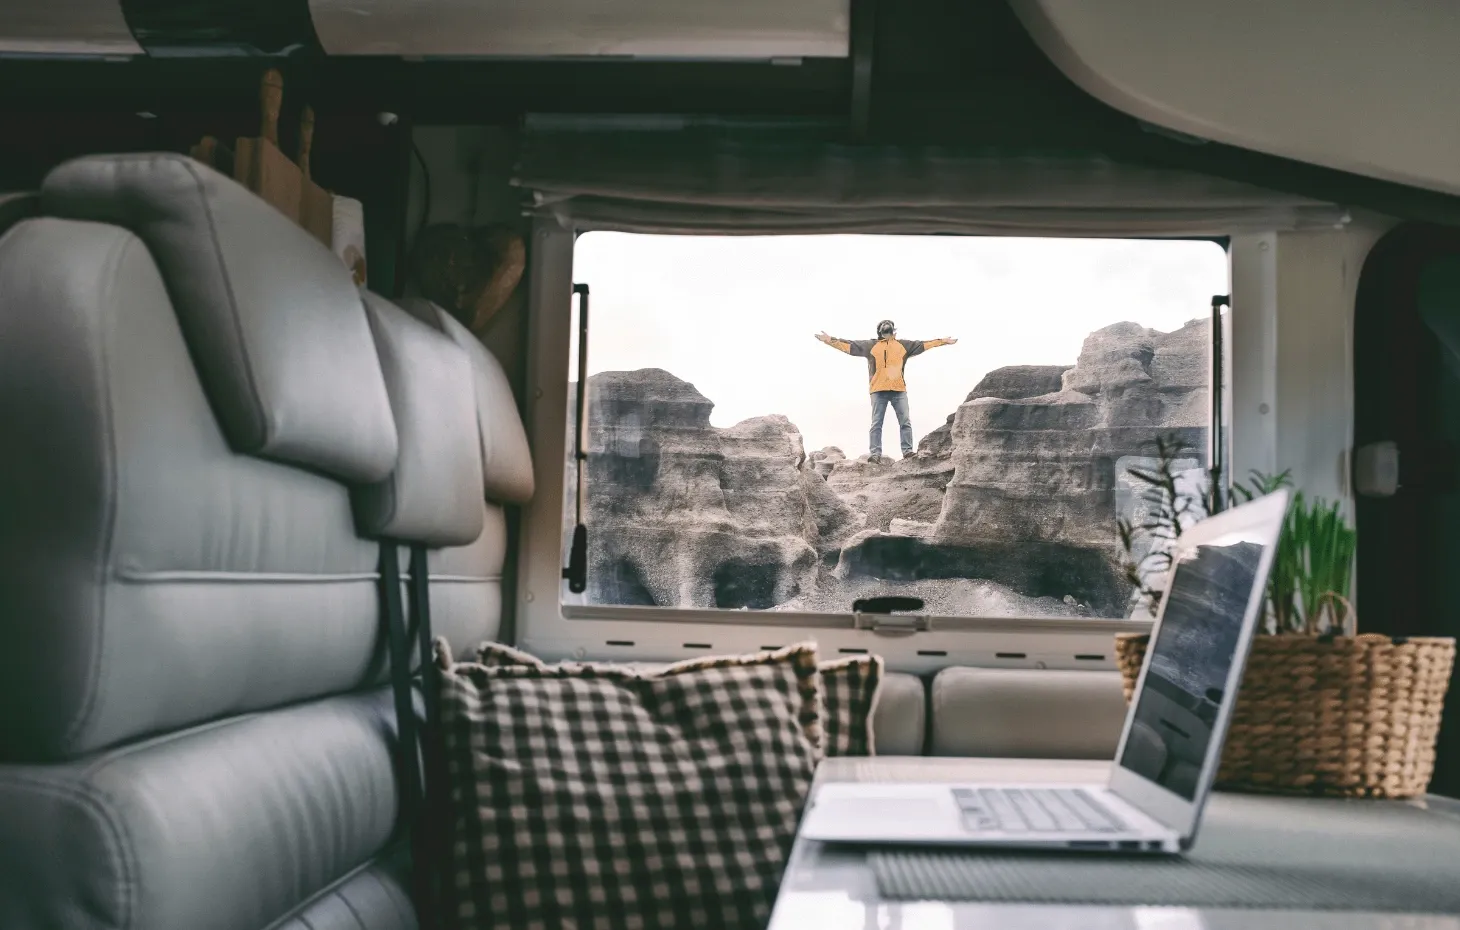 Digital nomad living and working in a van